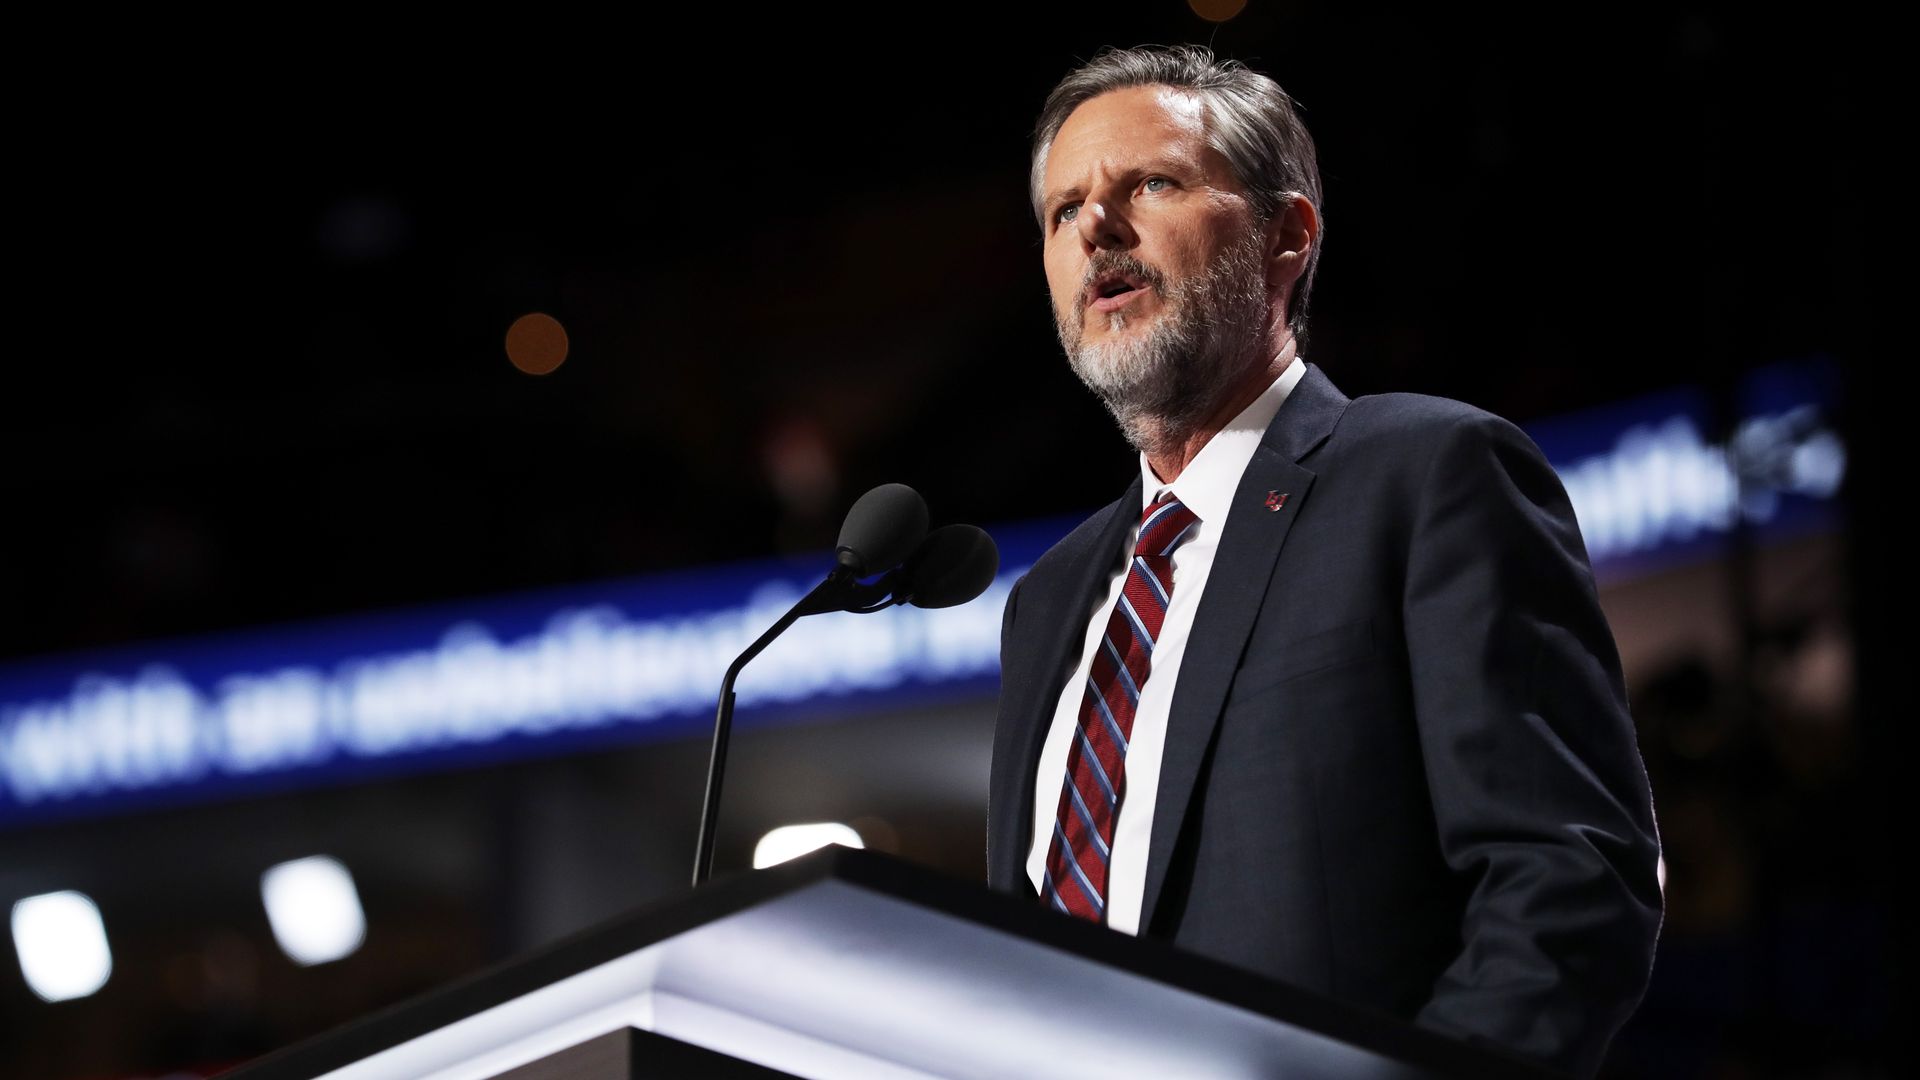 President of Liberty University, Jerry Falwell Jr., delivers a speech at the Republican National Convention on July 21, 2016 